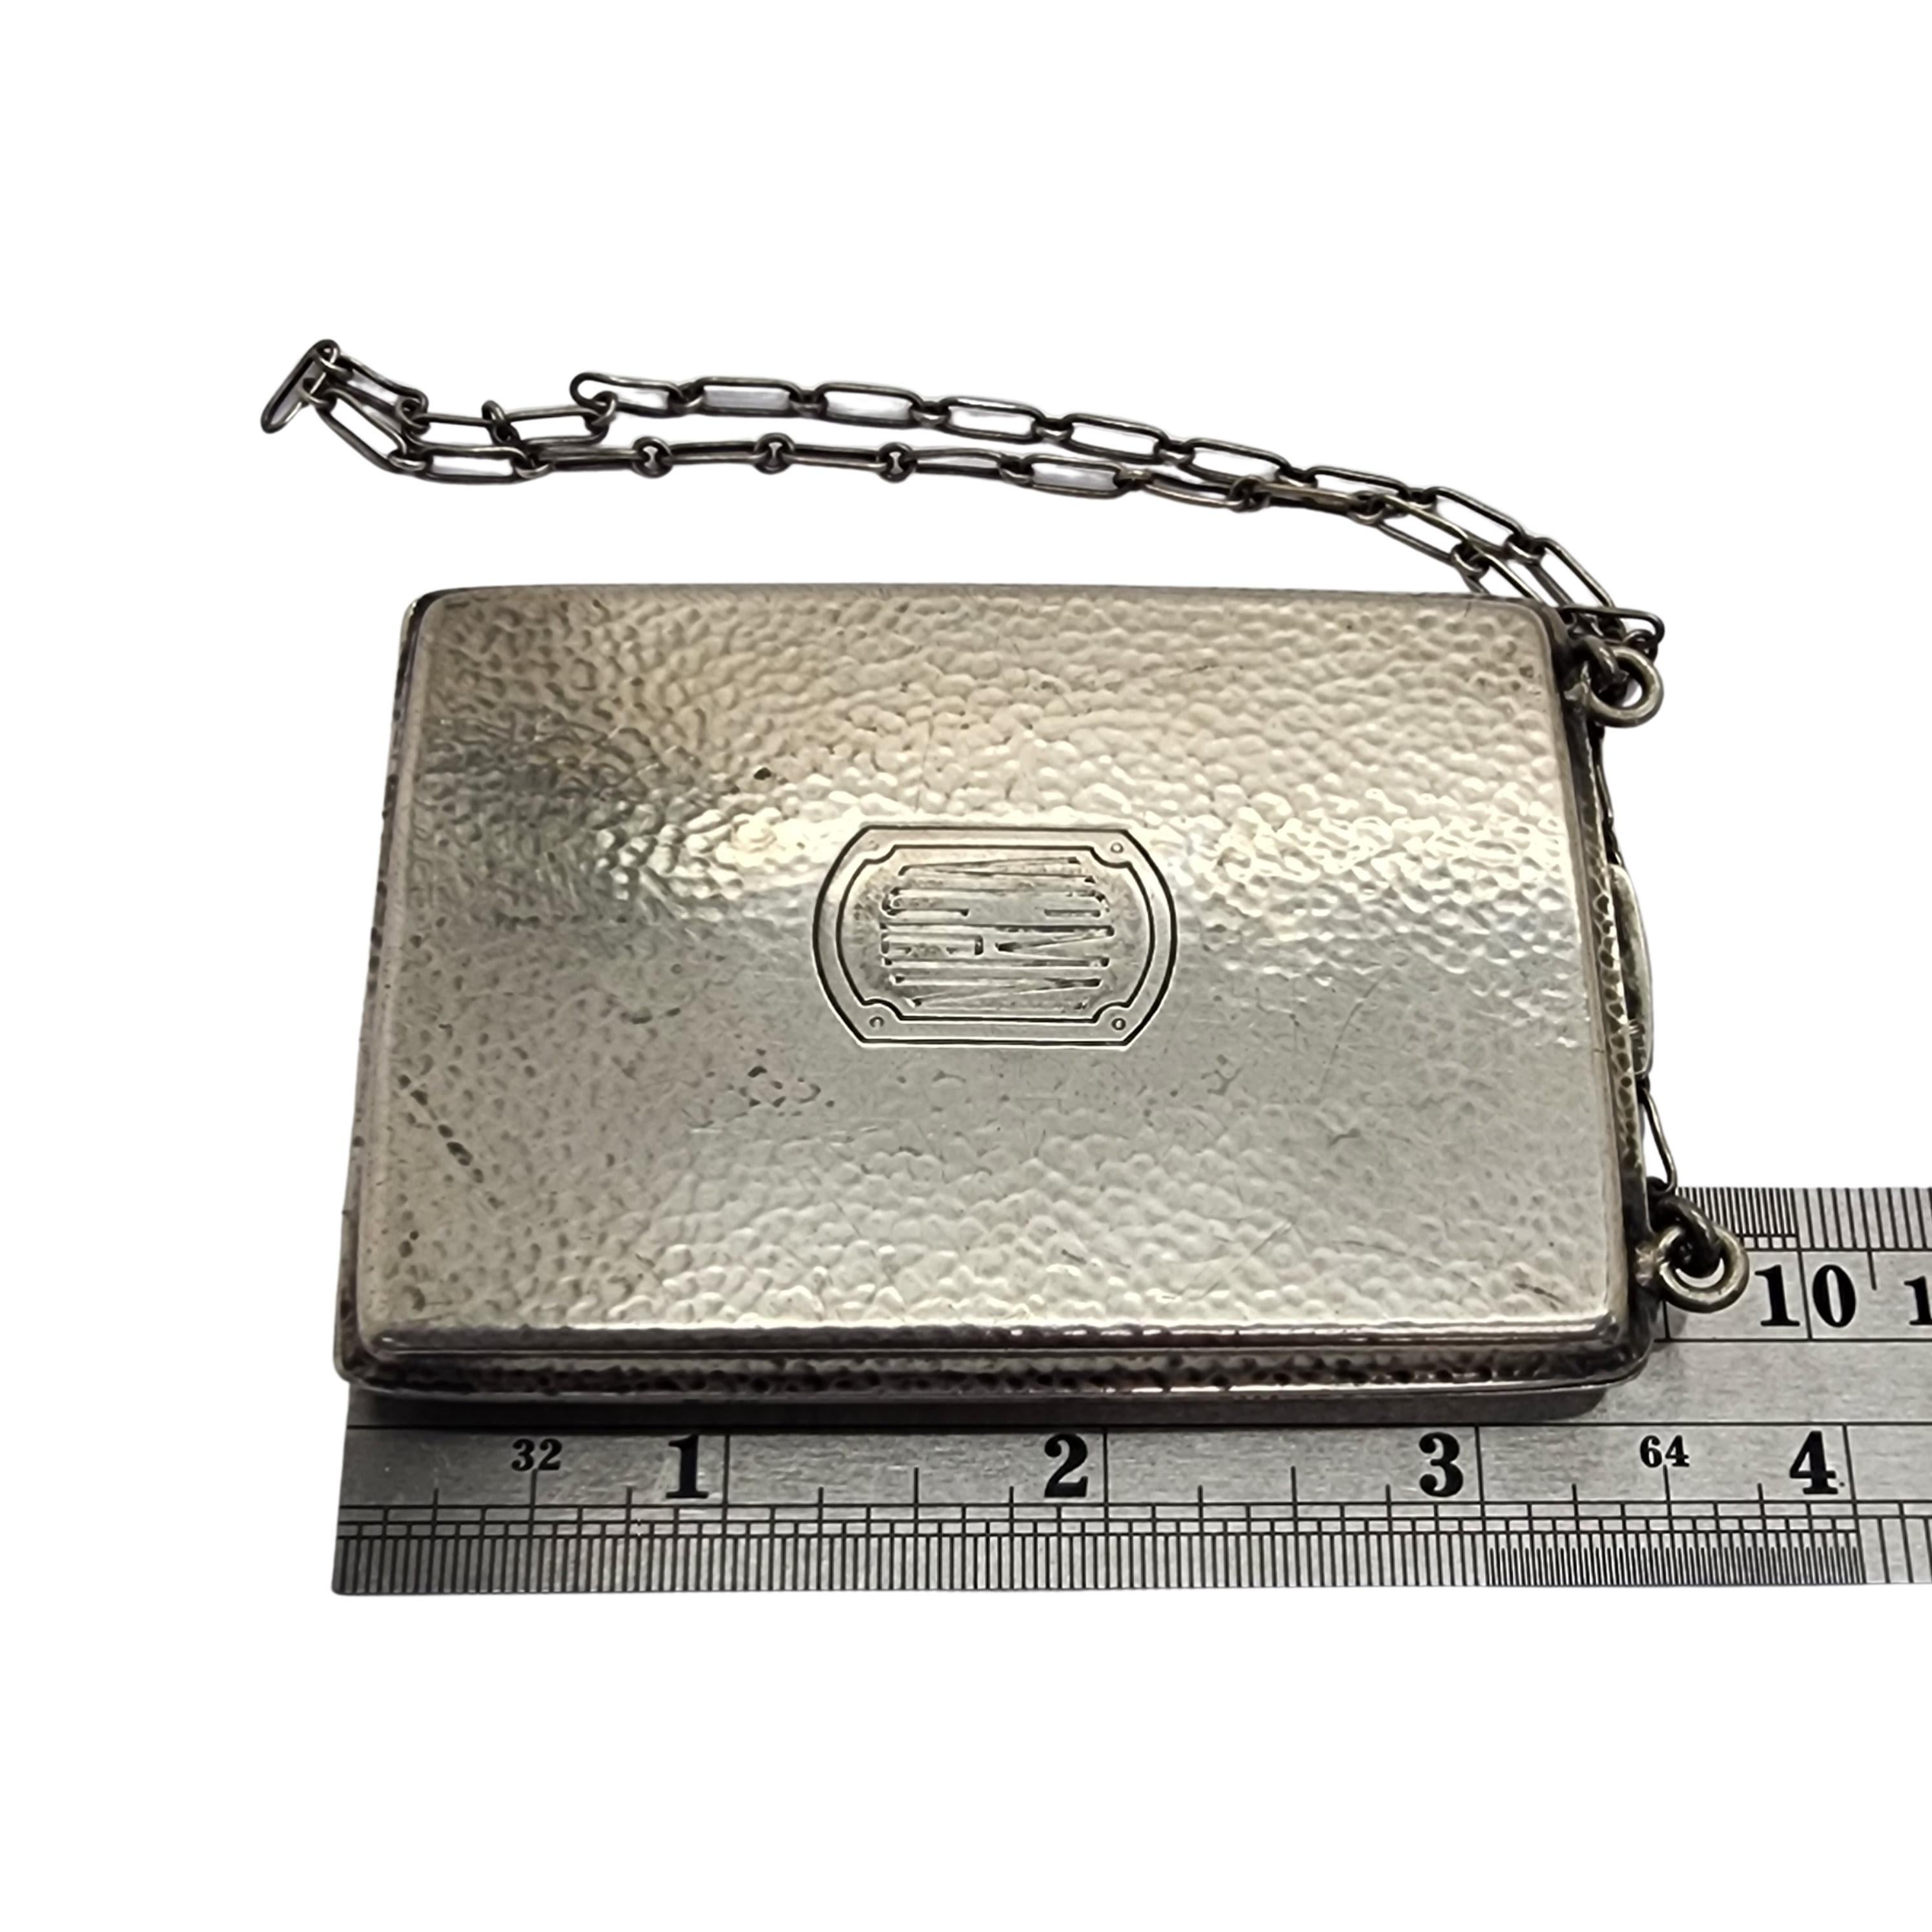 R Blackinton & Co Sterling Silver Coin Compact Purse 7043 with Monogram #15047 For Sale 3